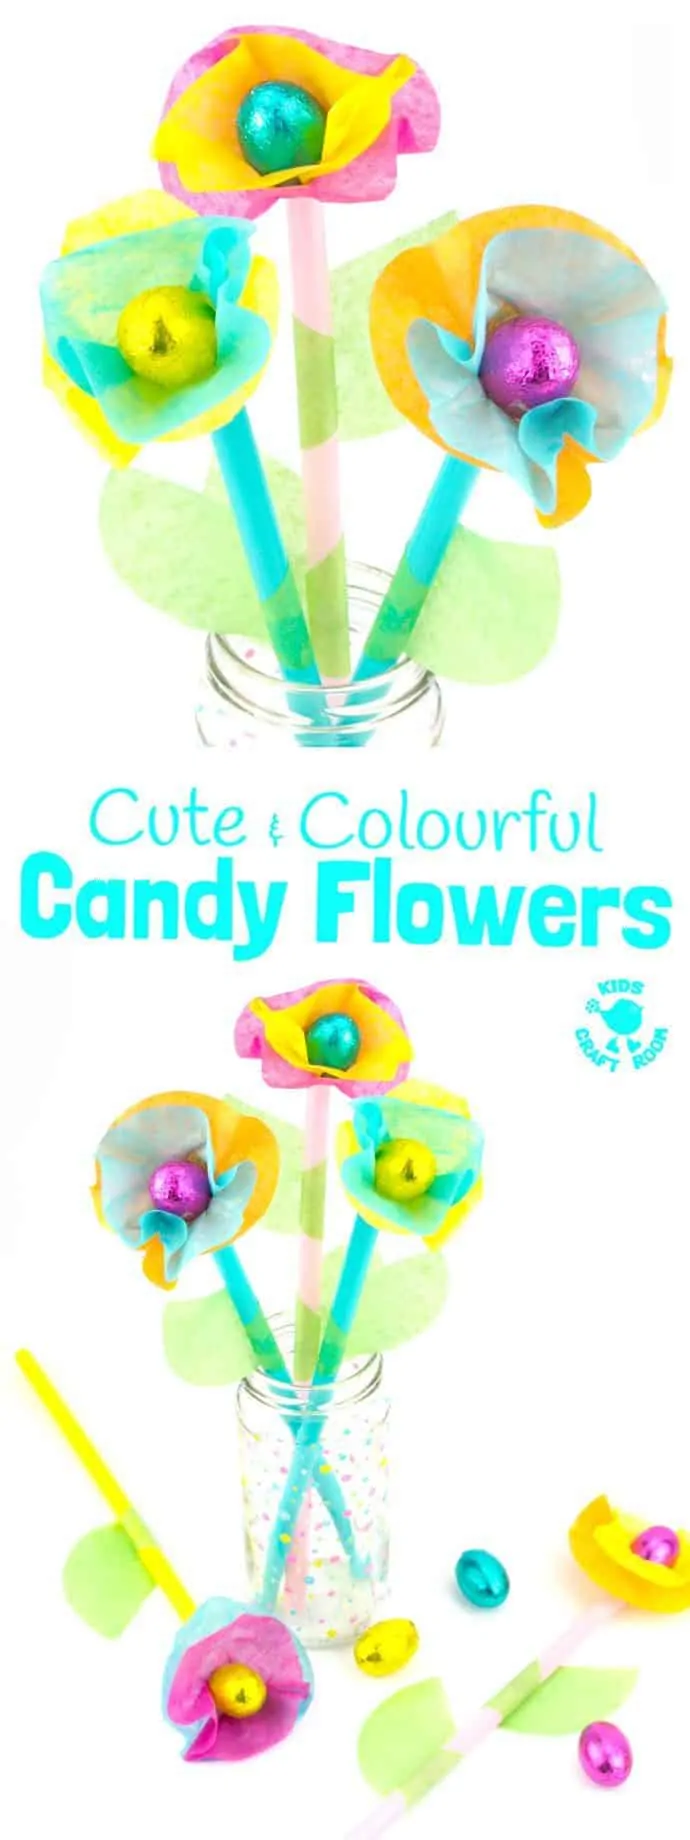 Kids will love this Candy and Tissue Paper Flower Craft. Simple homemade flowers with a centre of delicious candy! Such a fun Easter craft or Spring and Summer craft for kids and they make great homemade gifts or table centre pieces for parties and celebrations. #Easter #eastercrafts #flowercrafts #kidscrafts #craftsforkids #kidscraftroom #flowers #easterflowers #homemadeflowers #diyflowers #paperflowers #springcrafts